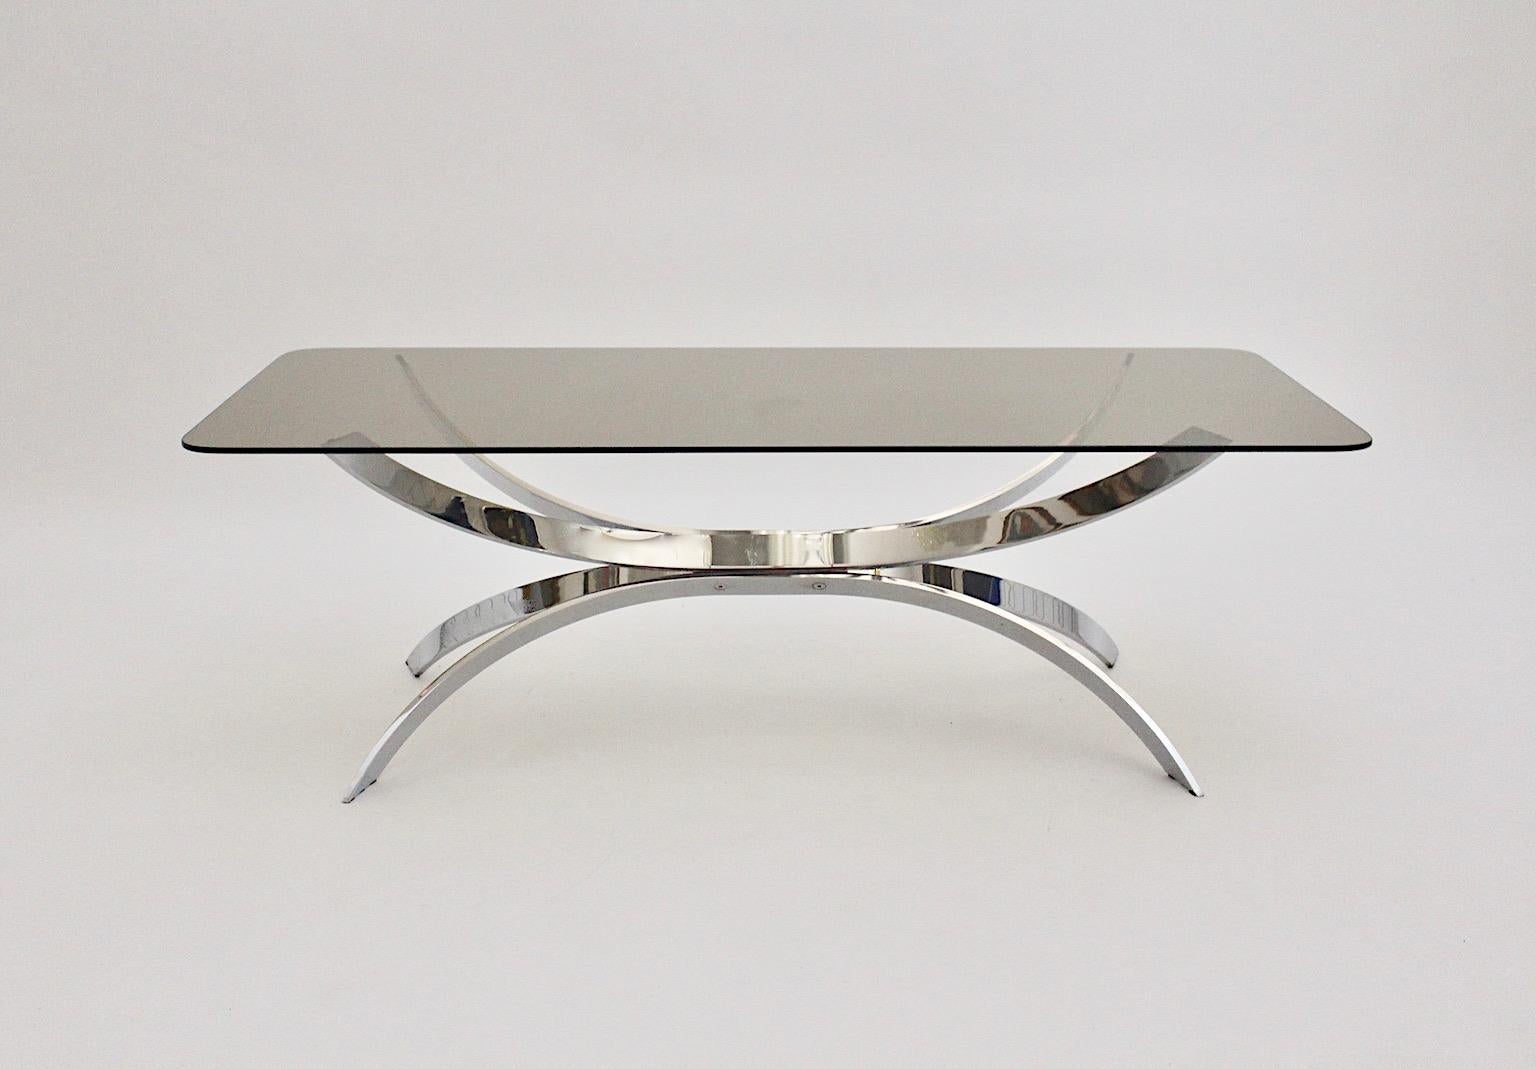 Chromed metal sculptural vintage coffee table or sofa table with rectangular smoked glass top designed and manufactured 1970s.
The chromed metal base shows a beautiful movement and provides a cool and sophisticated touch throughout its silver tone.